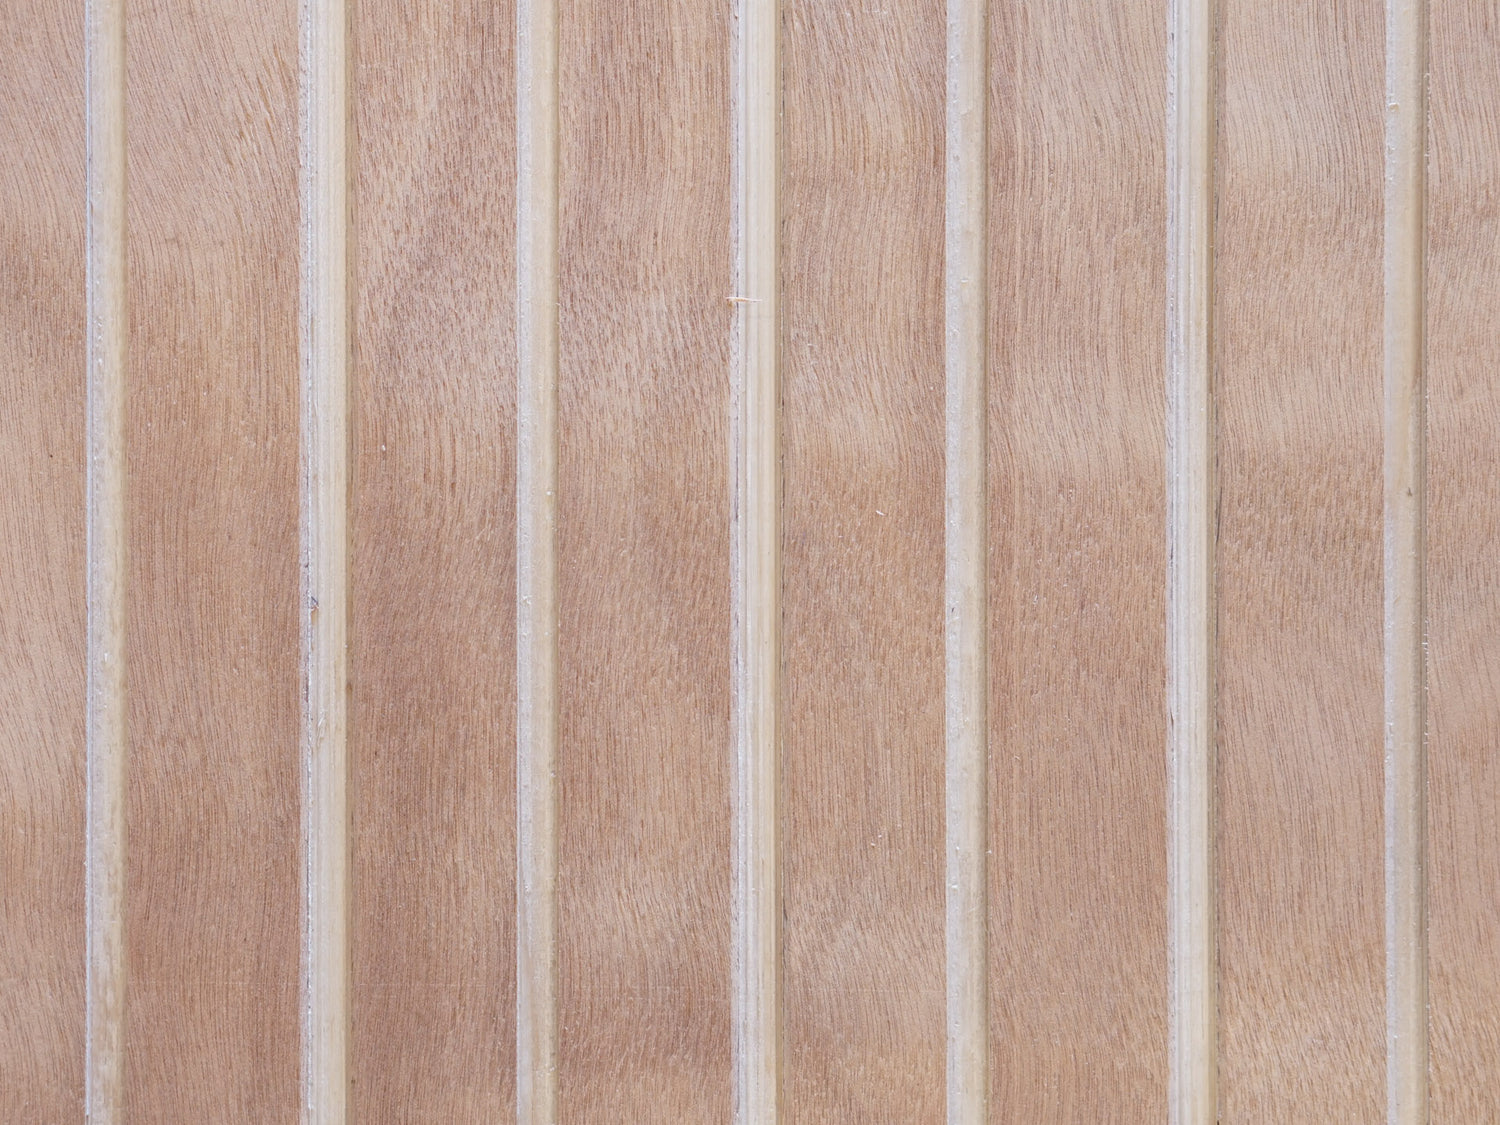 Close up of Vintage Plywood Millworks' Wideline siding showing the wide grooves and wood grain pattern